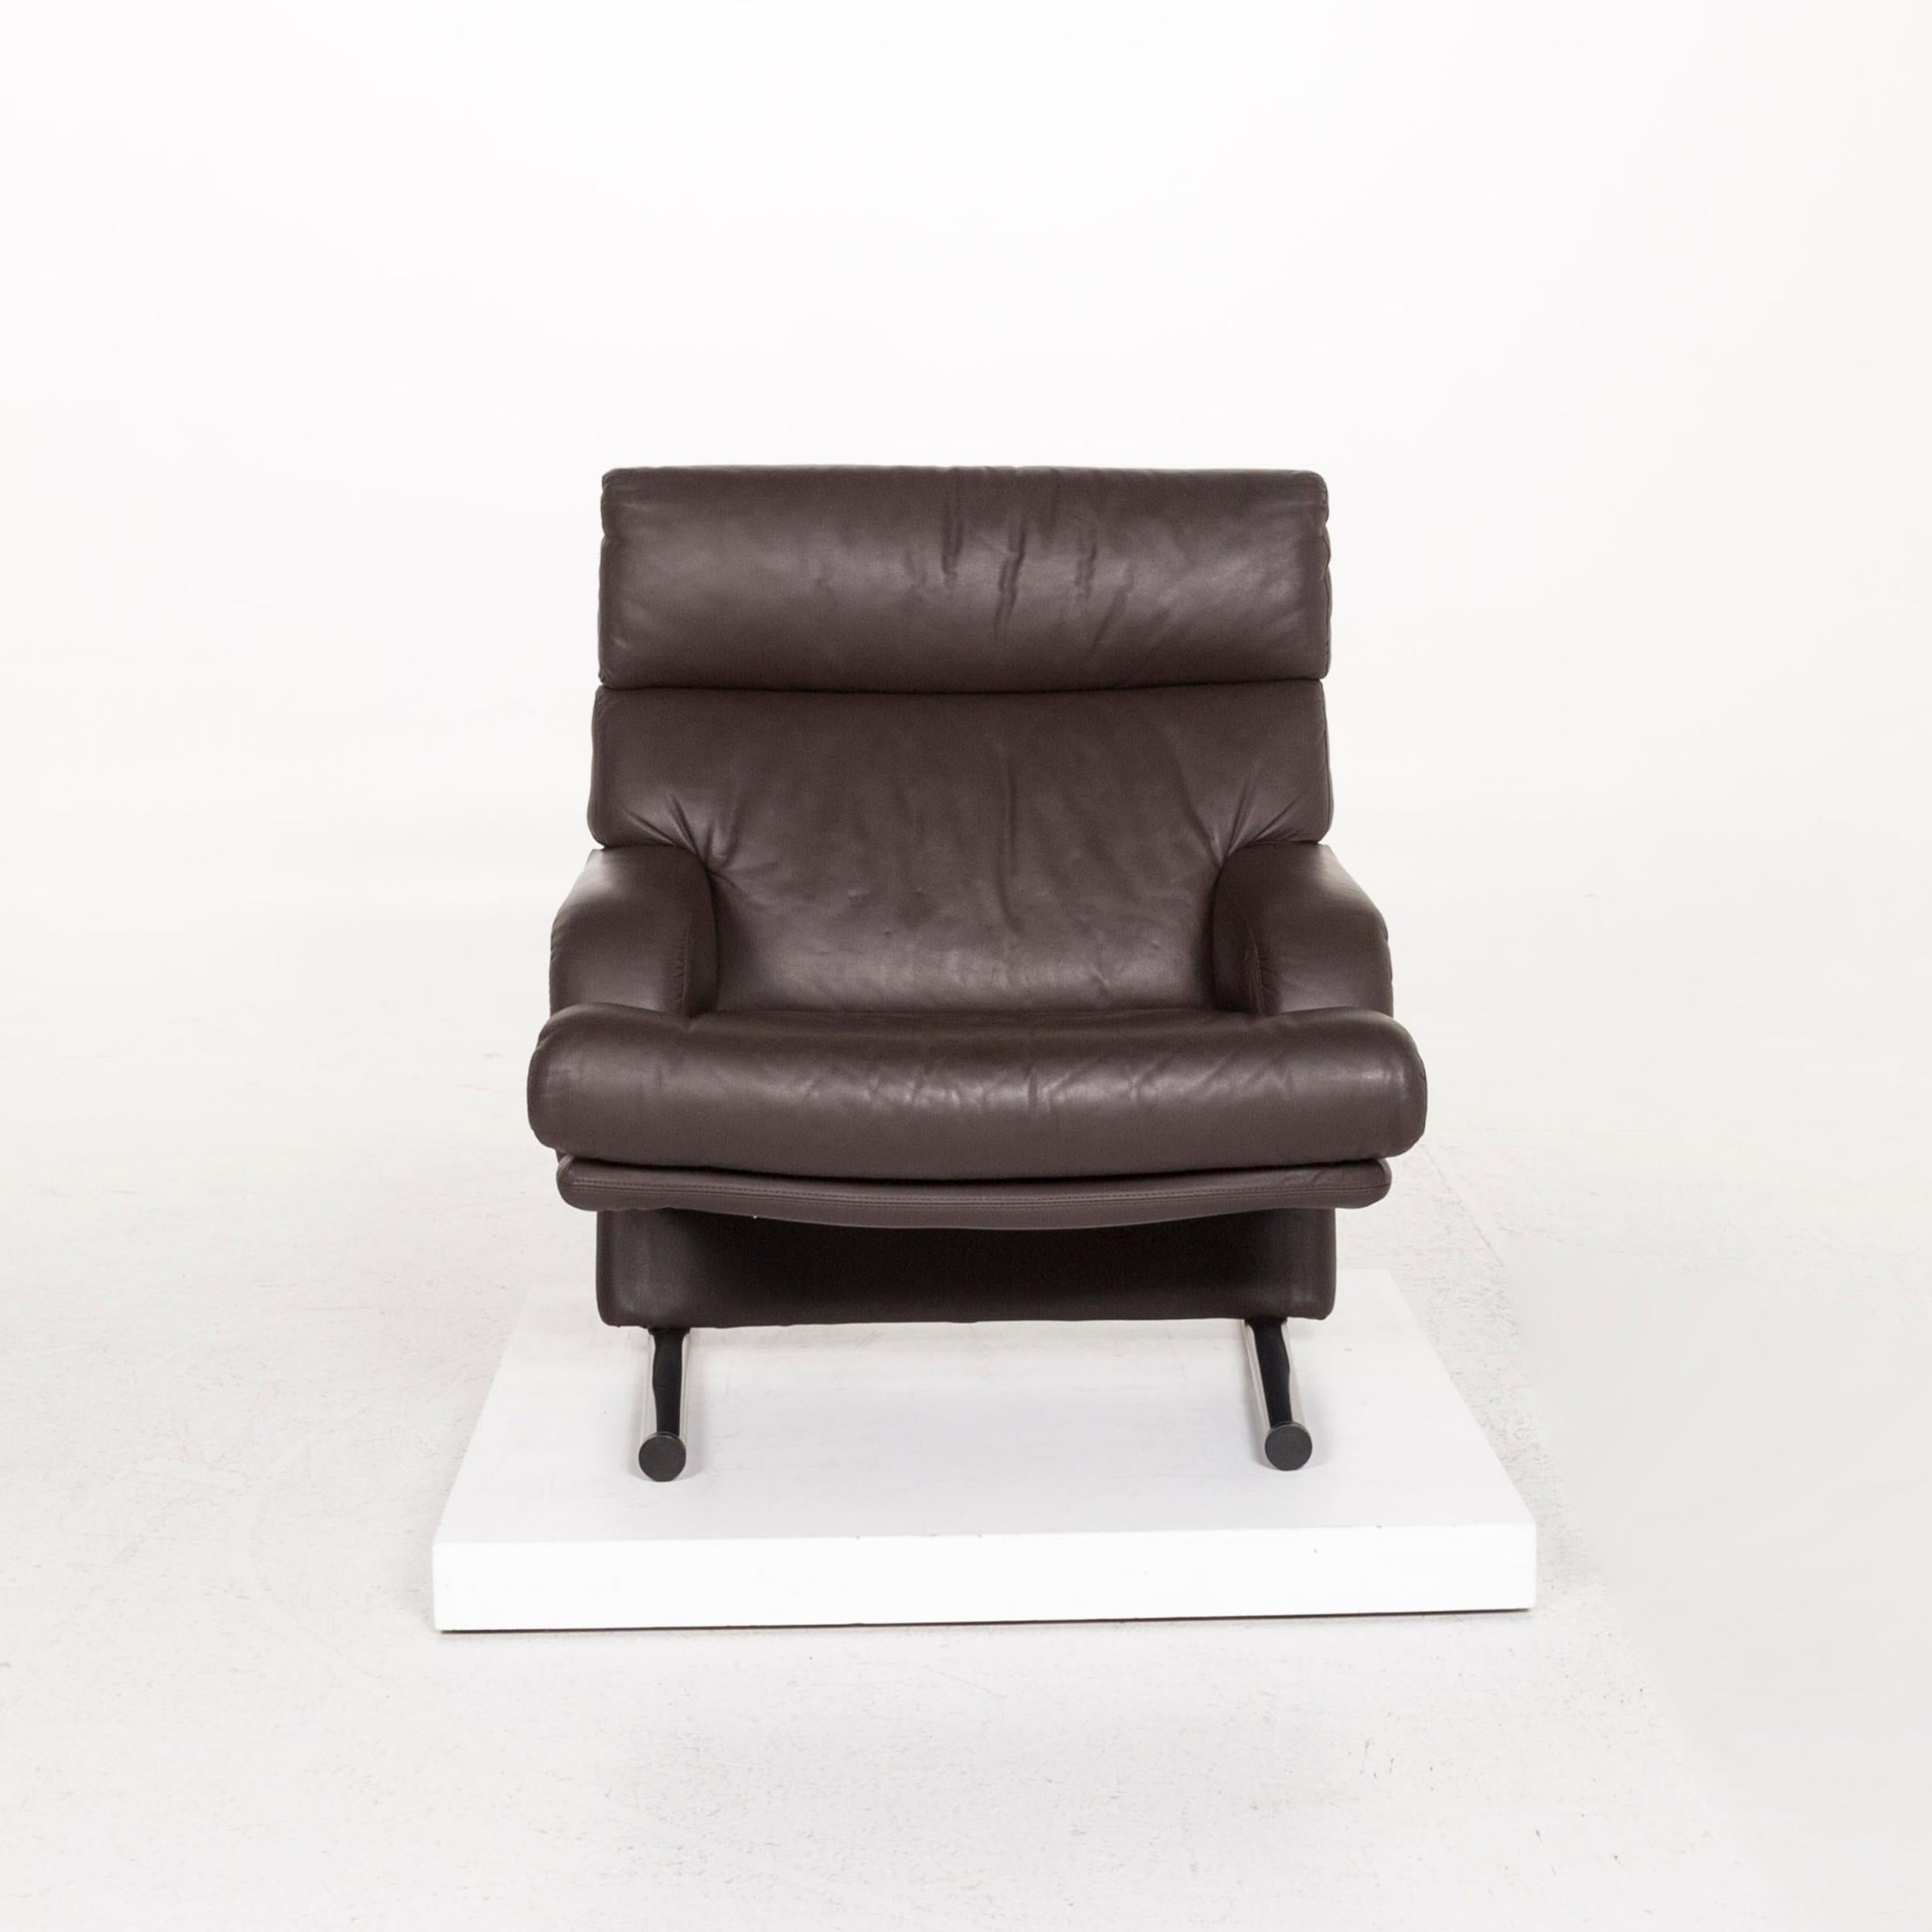 Contemporary Rolf Benz Leather Armchair Brown Dark Brown Club Armchair For Sale